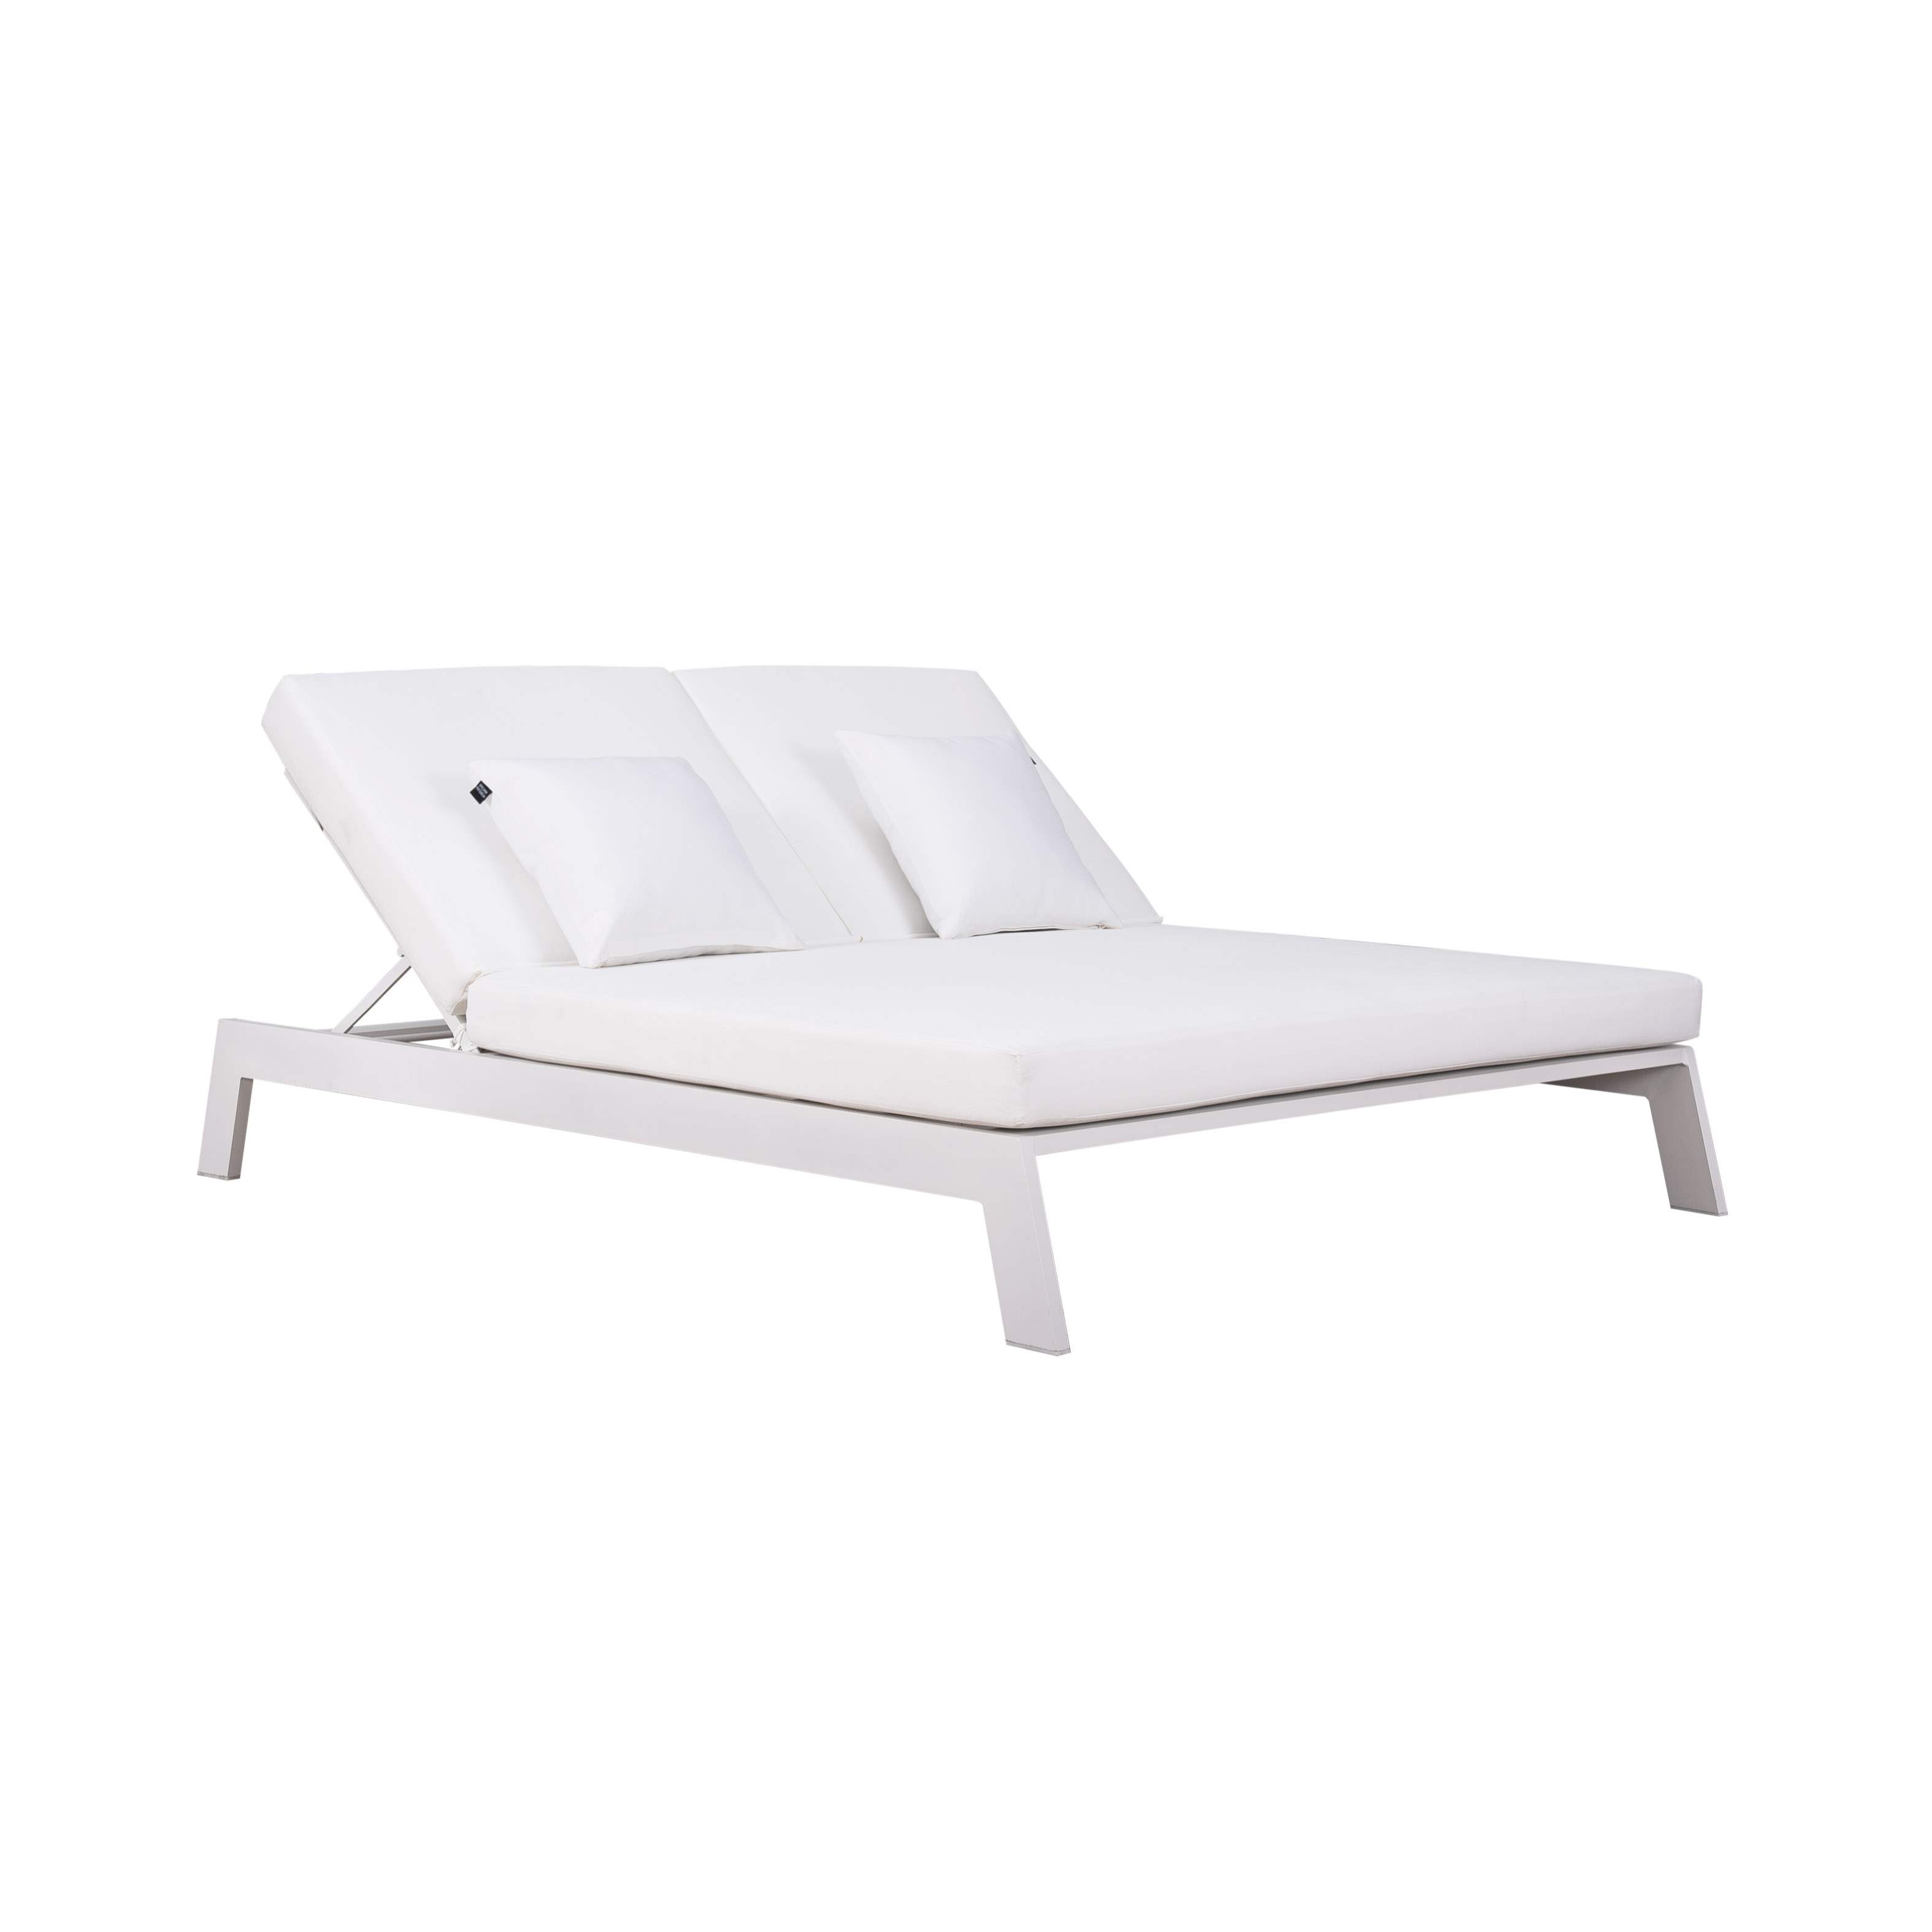 Casa alu.double daybed S4